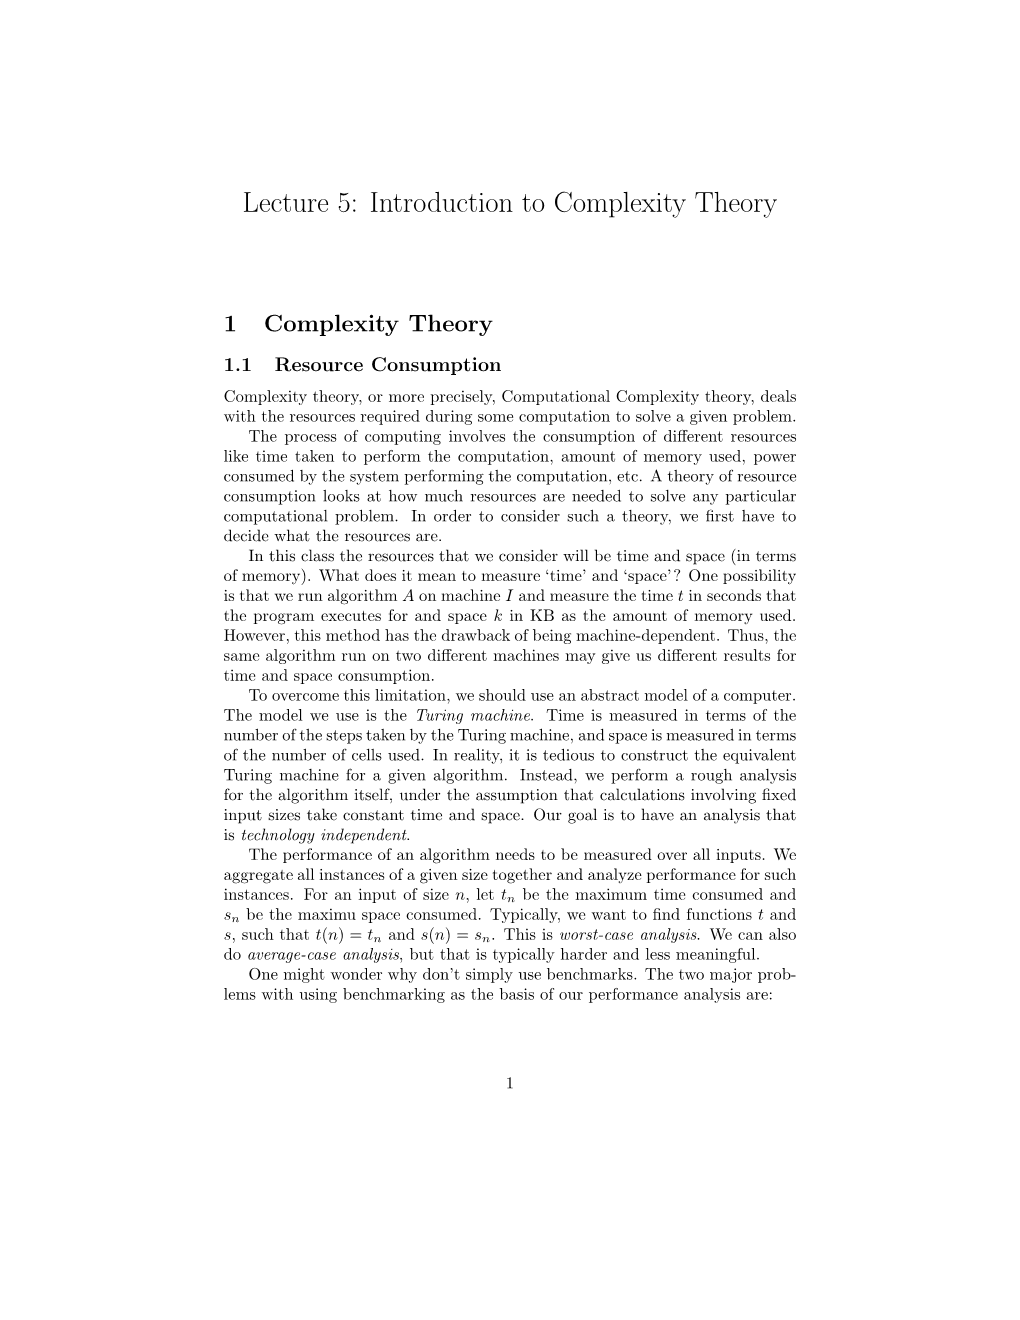 Introduction to Complexity Theory